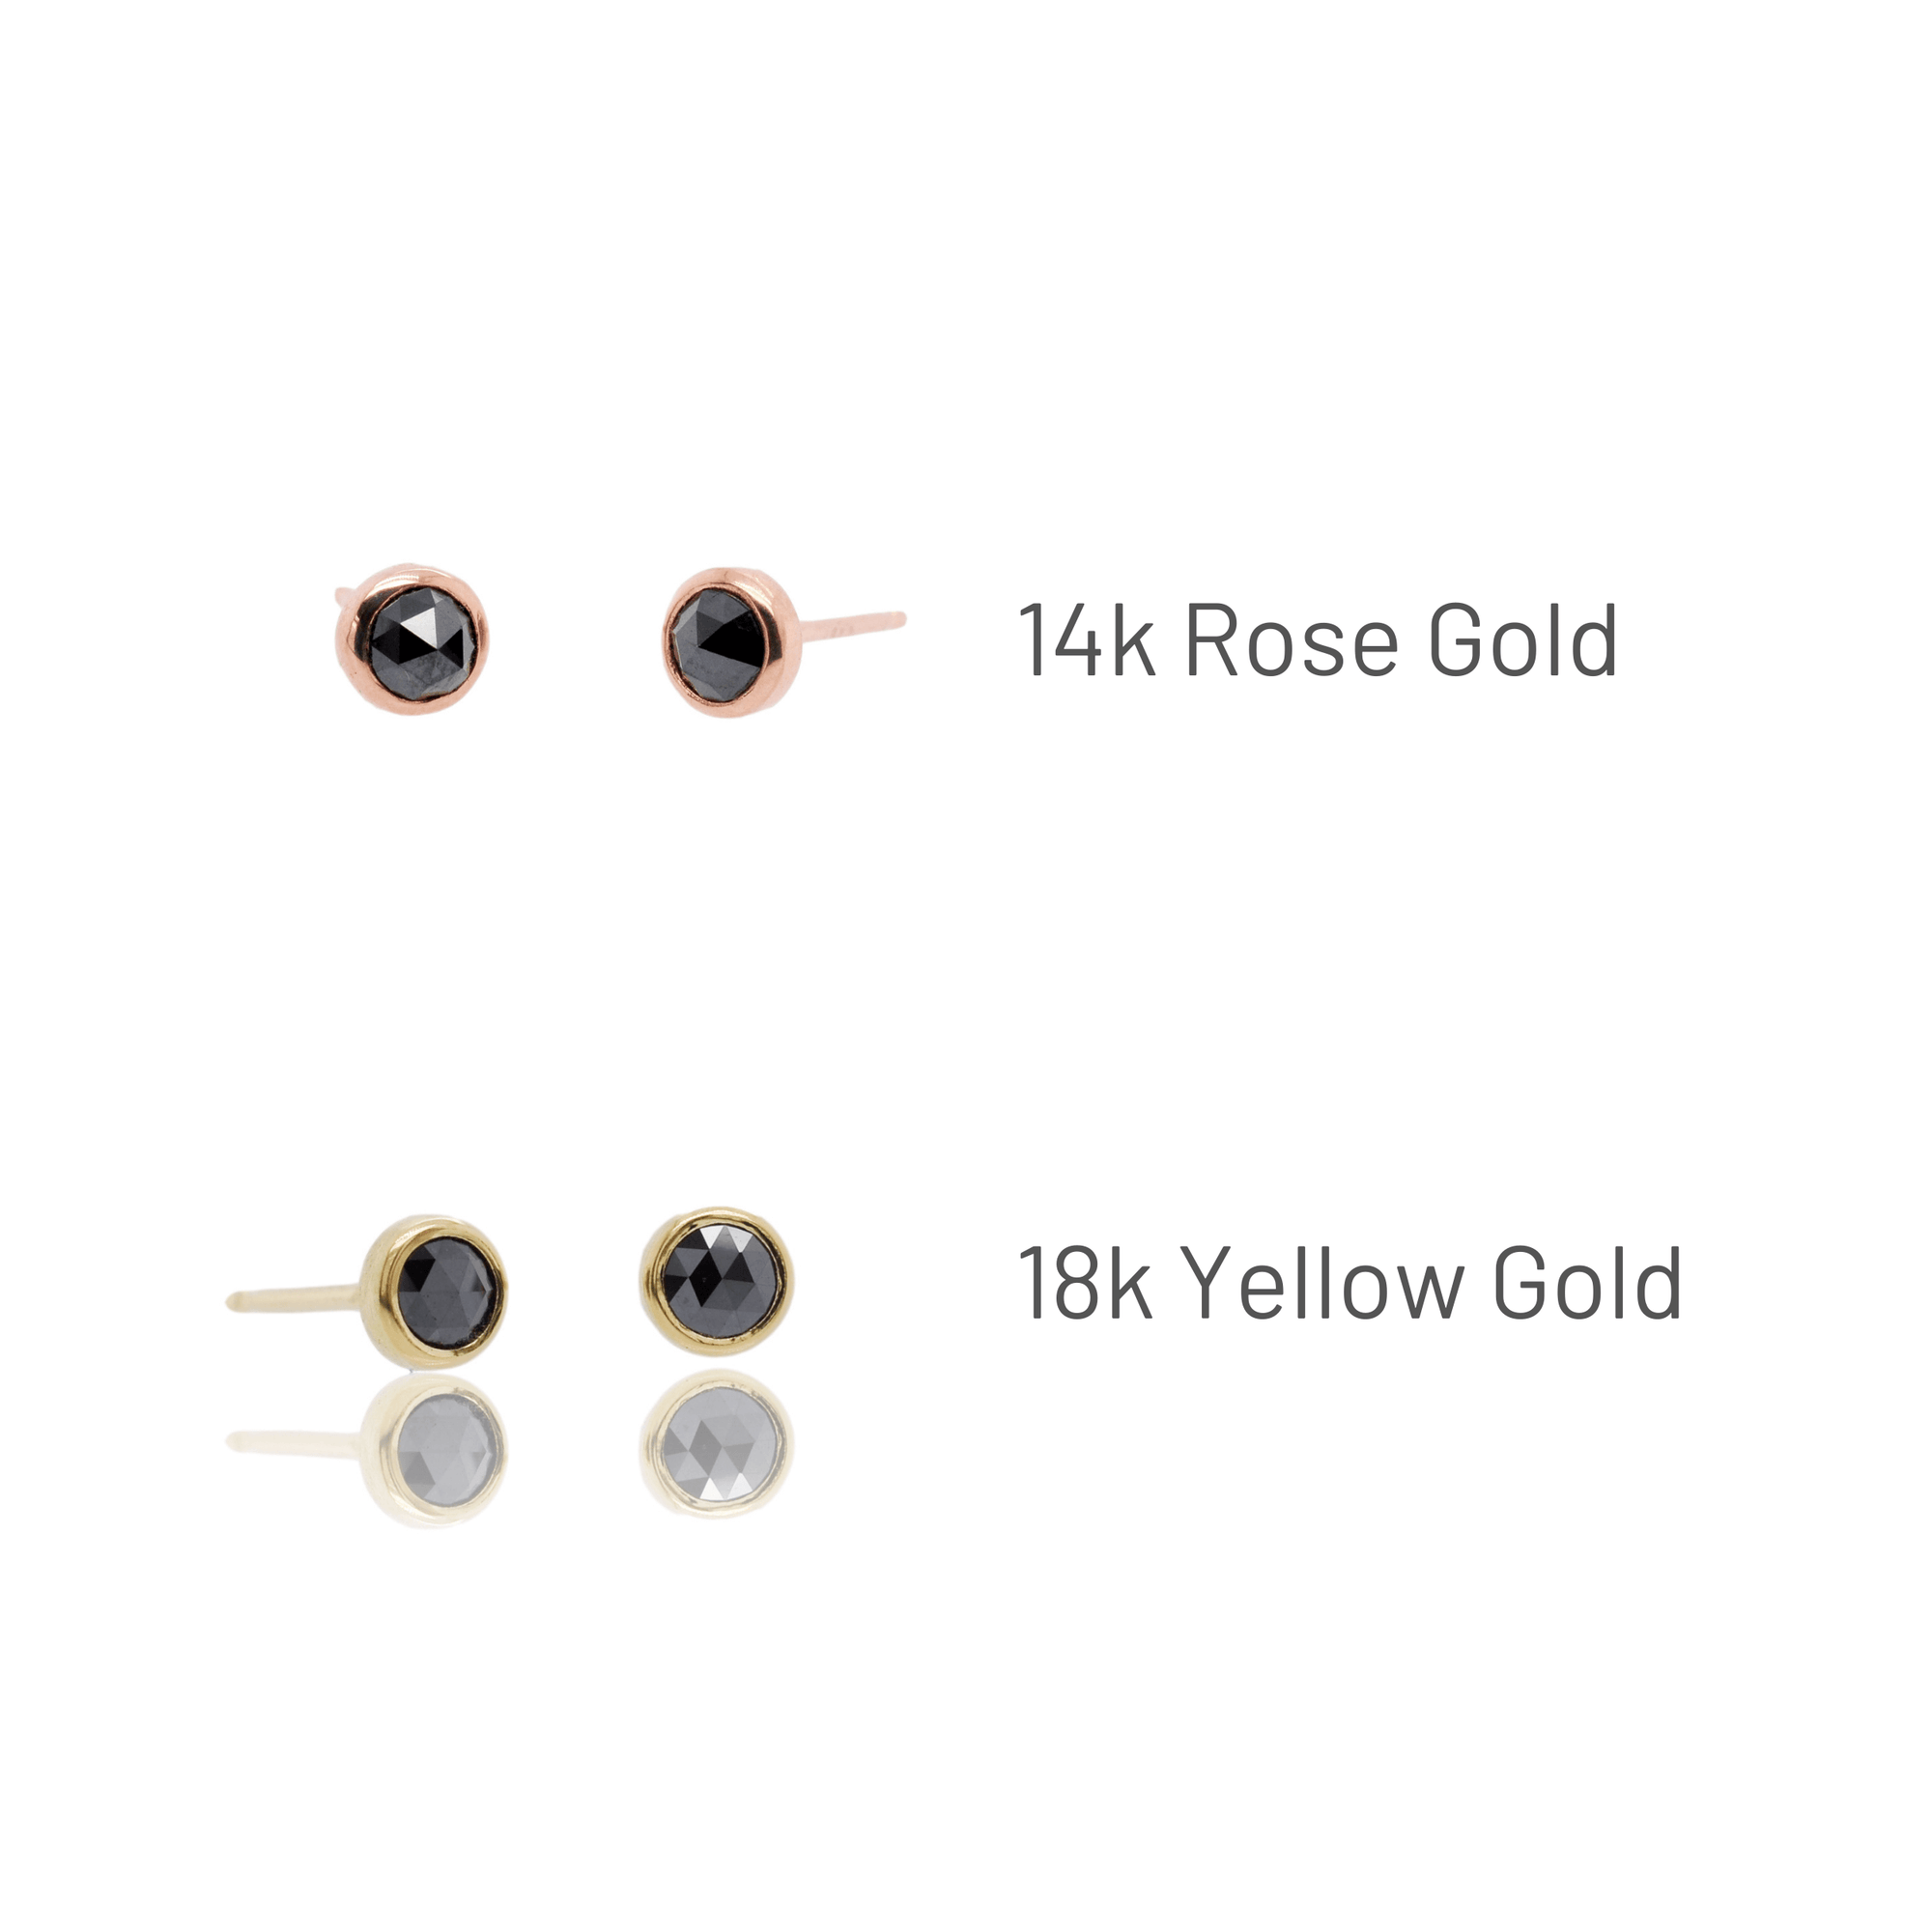 Rose cut black diamond stud earrings in rose gold and yellow gold.